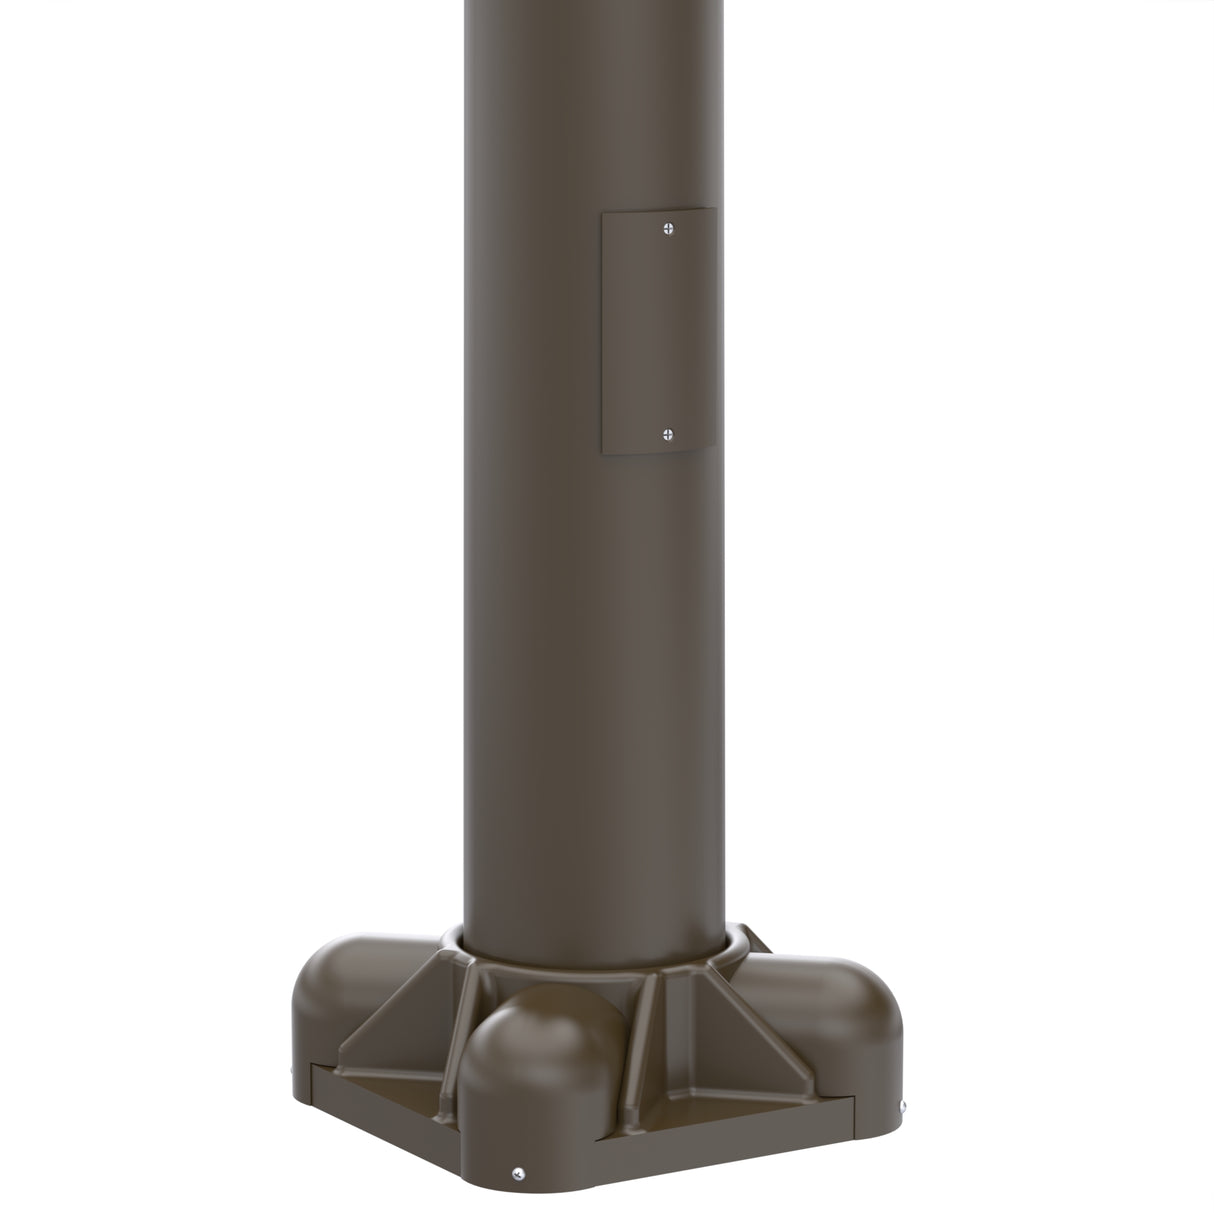 25' Tall x 6.0" Base OD x 4.0" Top OD x 0.156" Thick, Round Tapered Aluminum, Anchor Base Light Pole